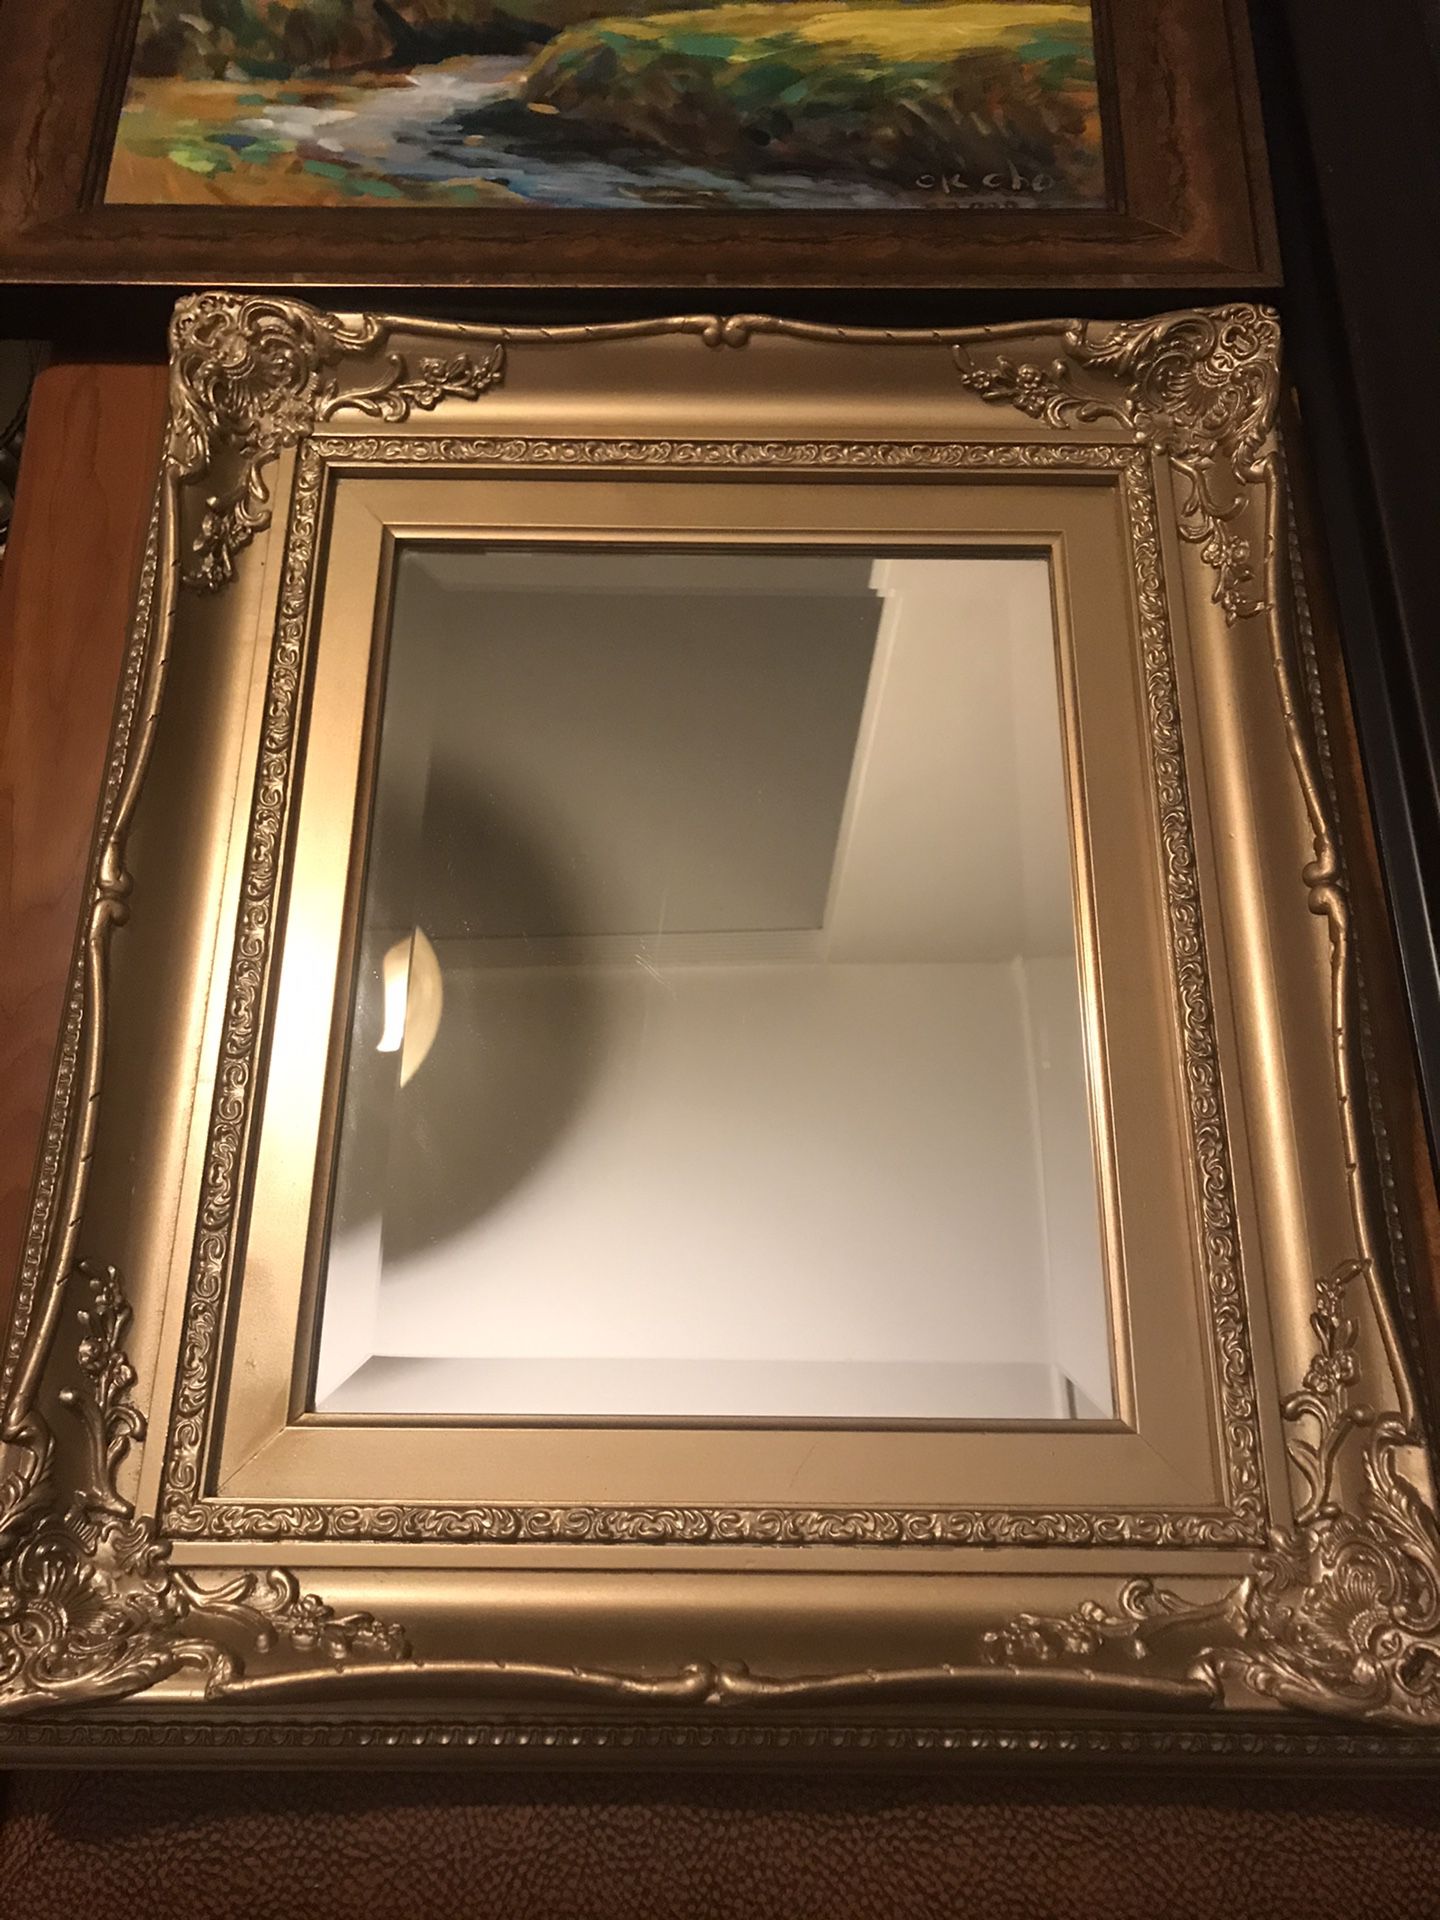 Mirrors, small Jewelry box/make up table, antique lamp, microwave